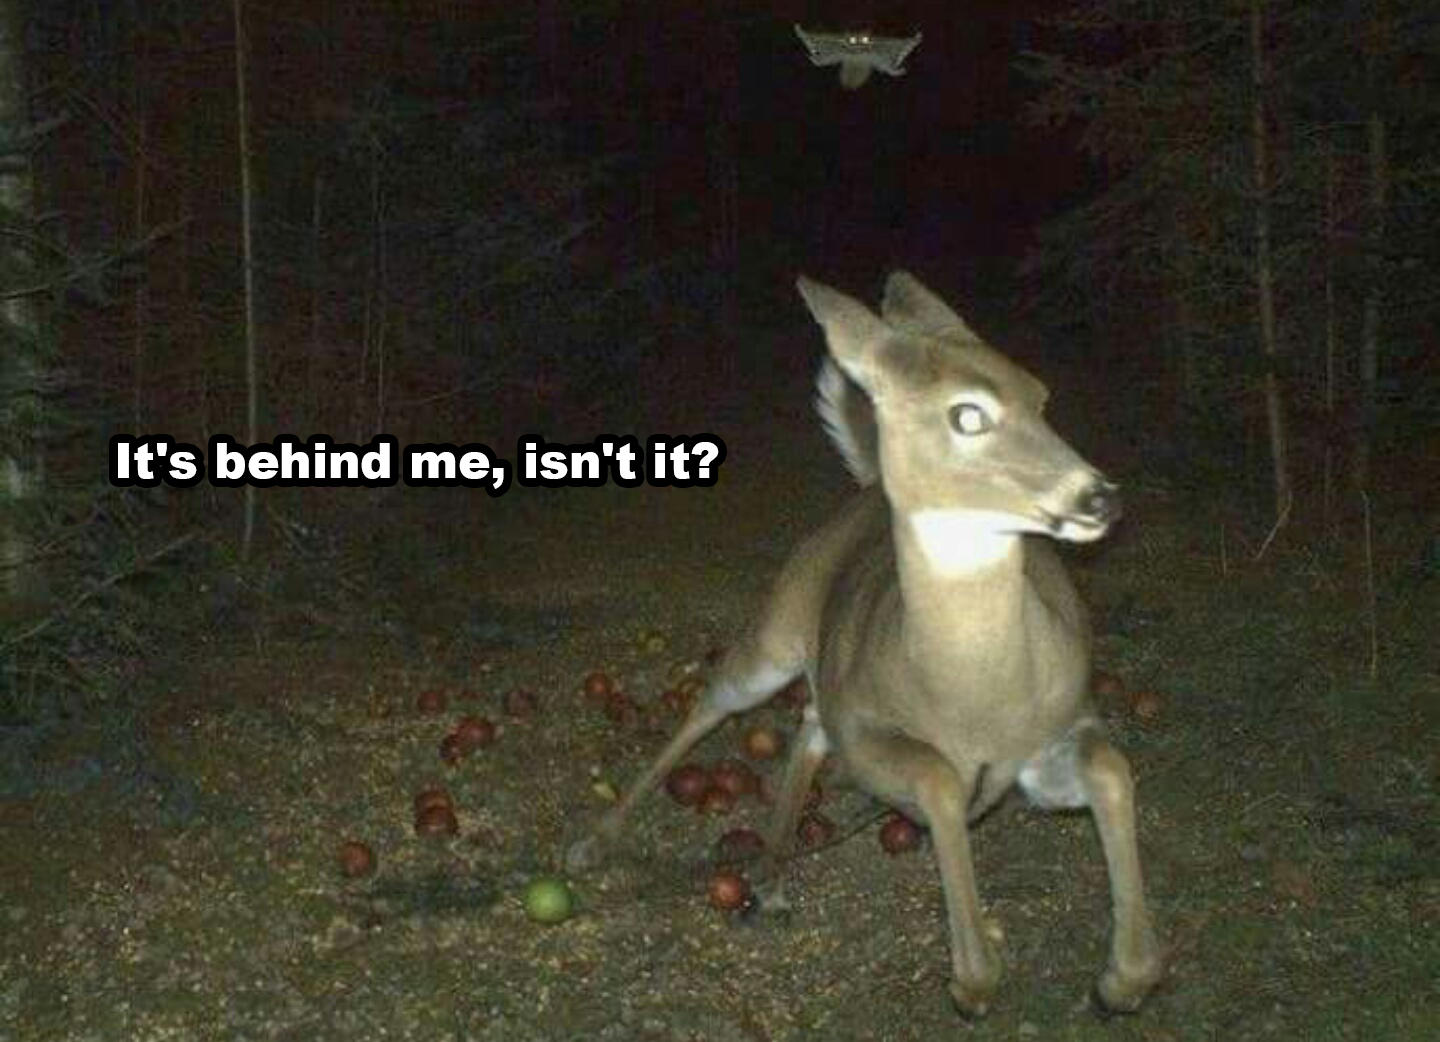 deer running from flying squirrel - It's behind me, isn't it?